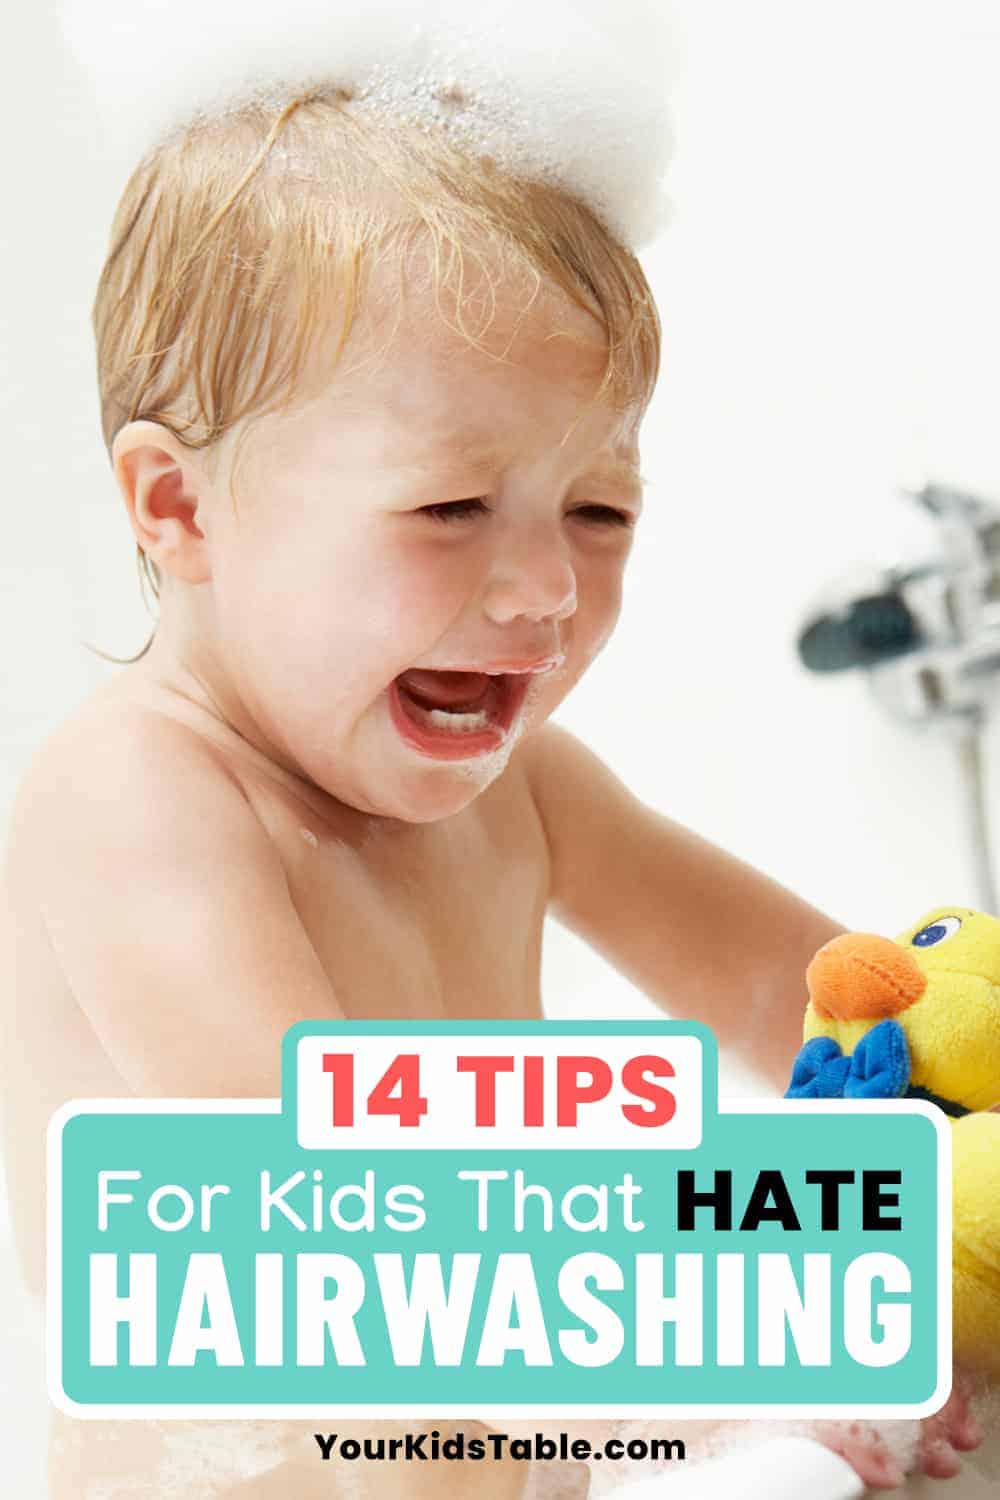 Here's a Method to Help Kids That Hate Hair Washing